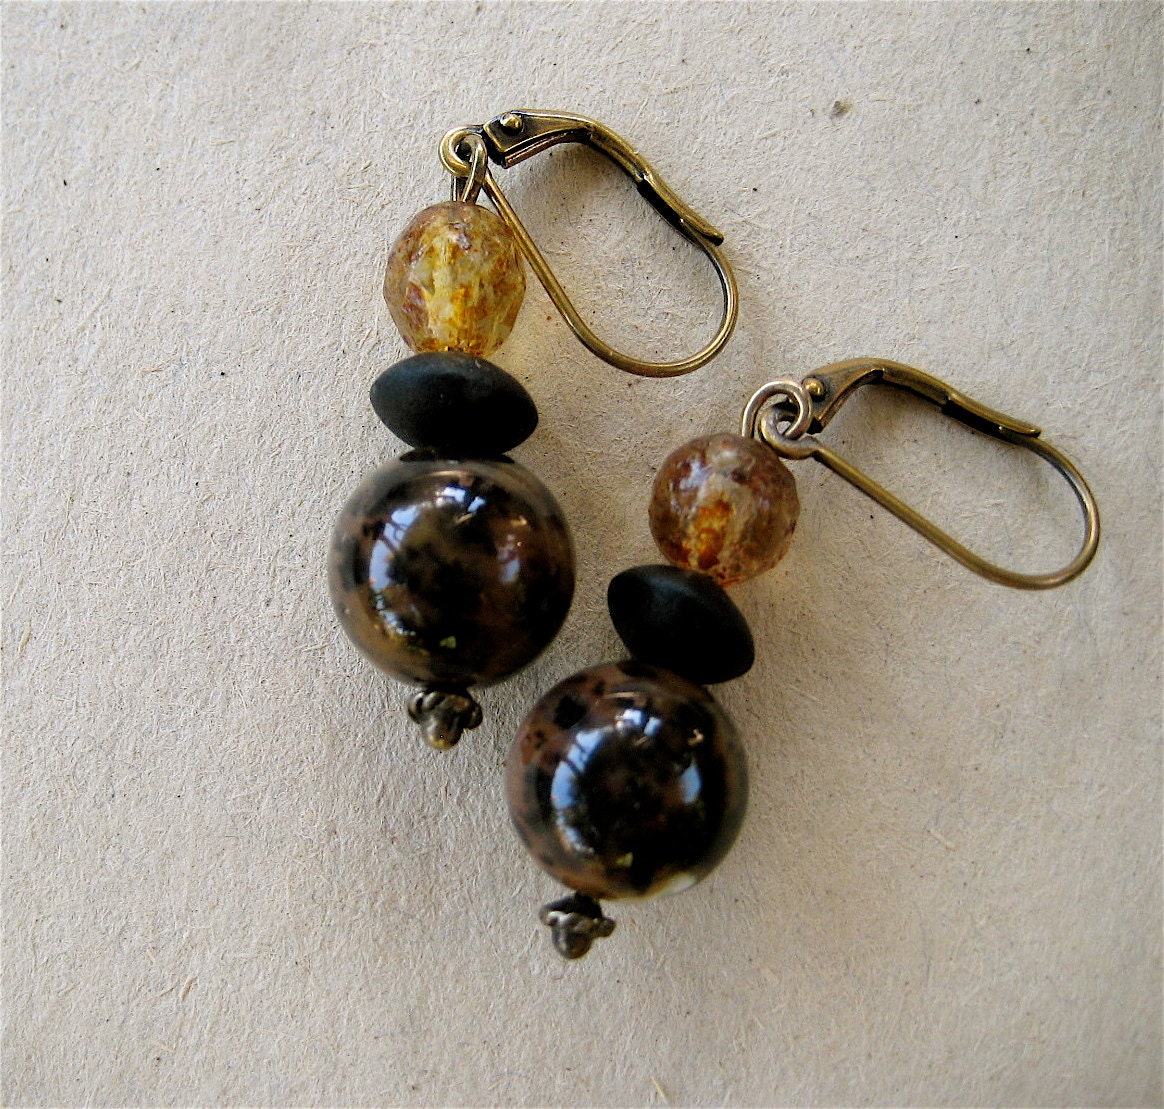 Dendritic Opal Earrings Moss Opal Black Brown Patterns with Black Onyx Gorgeous Fall Colors on Antiqued Brass Hooks - CatchingWaves